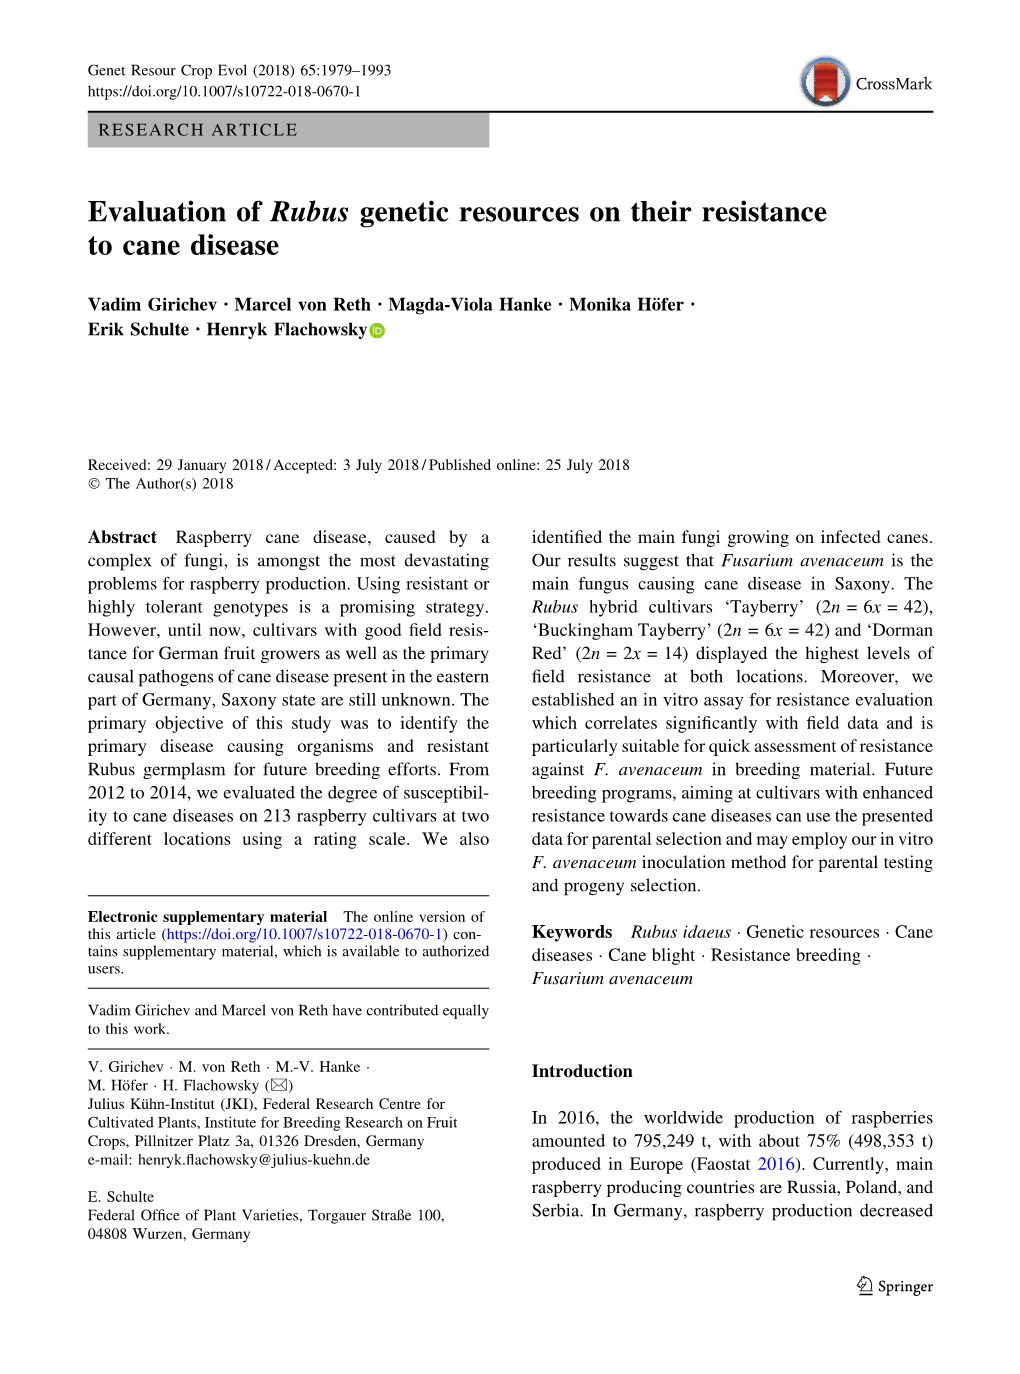 Evaluation of Rubus Genetic Resources on Their Resistance to Cane Disease